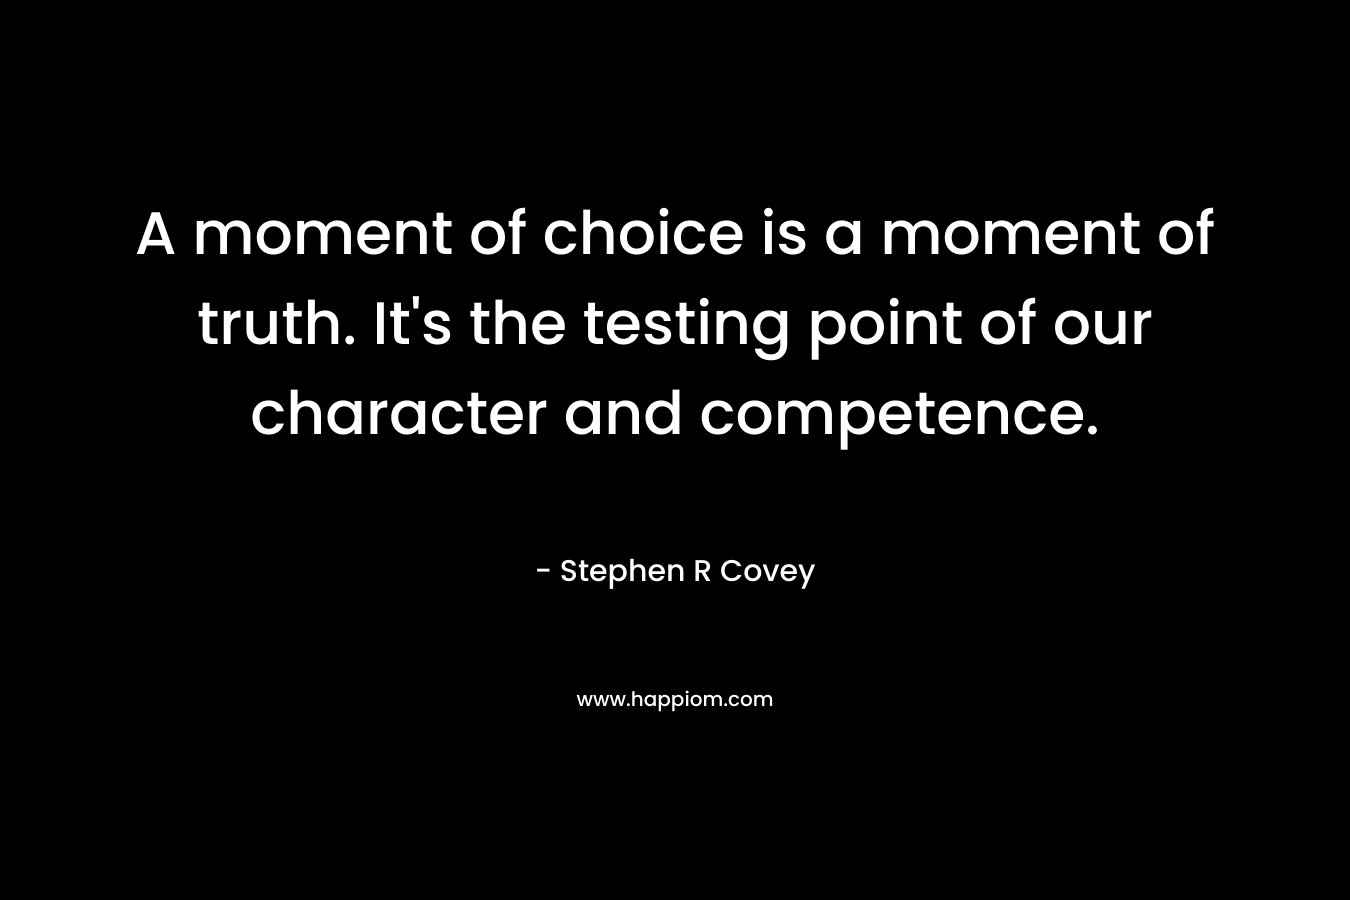 A moment of choice is a moment of truth. It's the testing point of our character and competence.